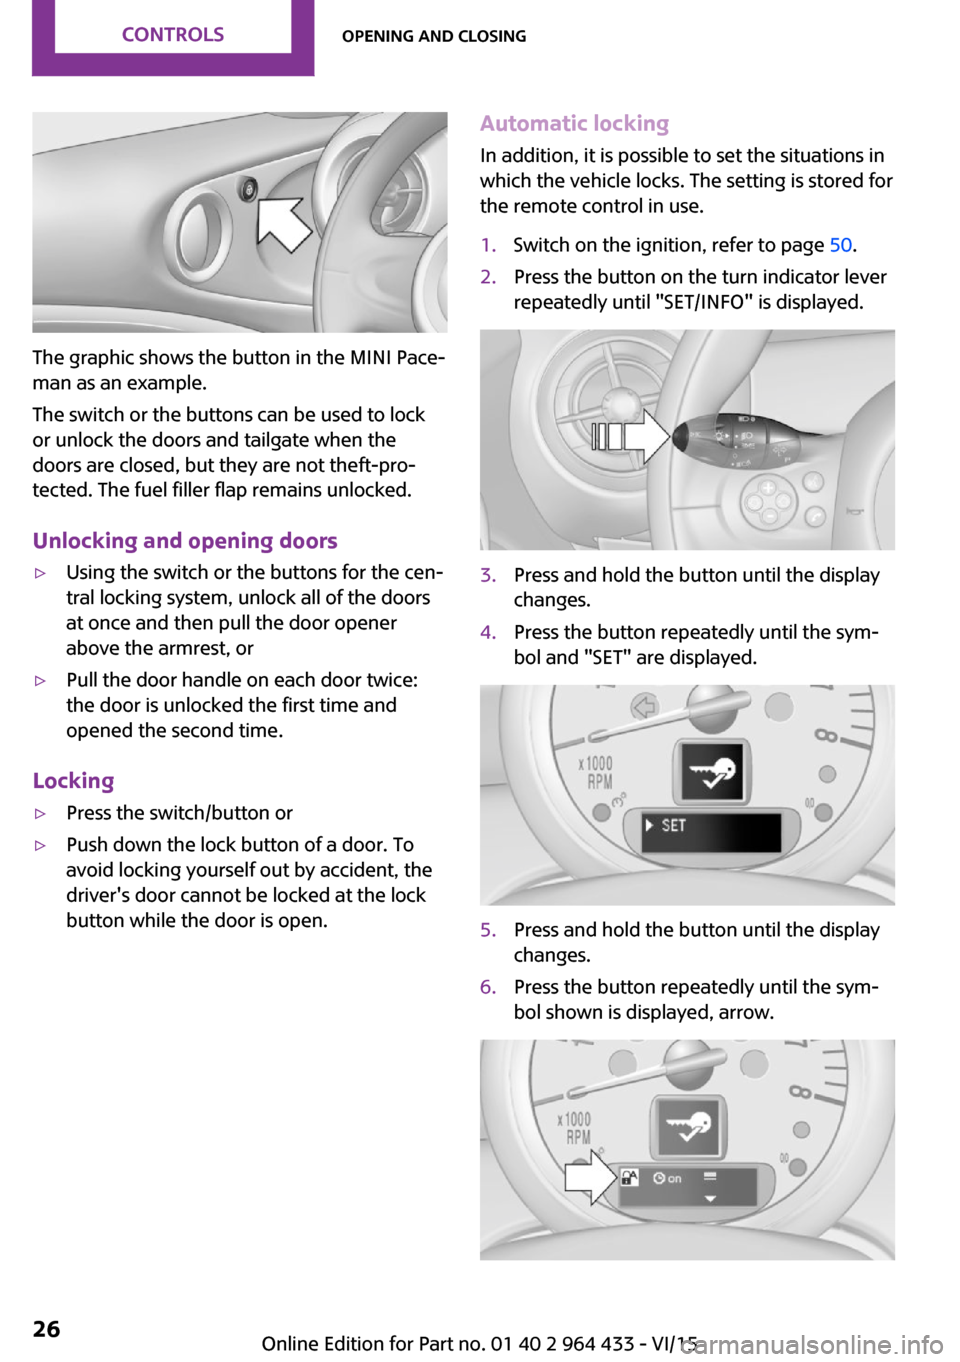 MINI Paceman 2016 Owners Guide The graphic shows the button in the MINI Pace‐
man as an example.
The switch or the buttons can be used to lock
or unlock the doors and tailgate when the
doors are closed, but they are not theft-pro